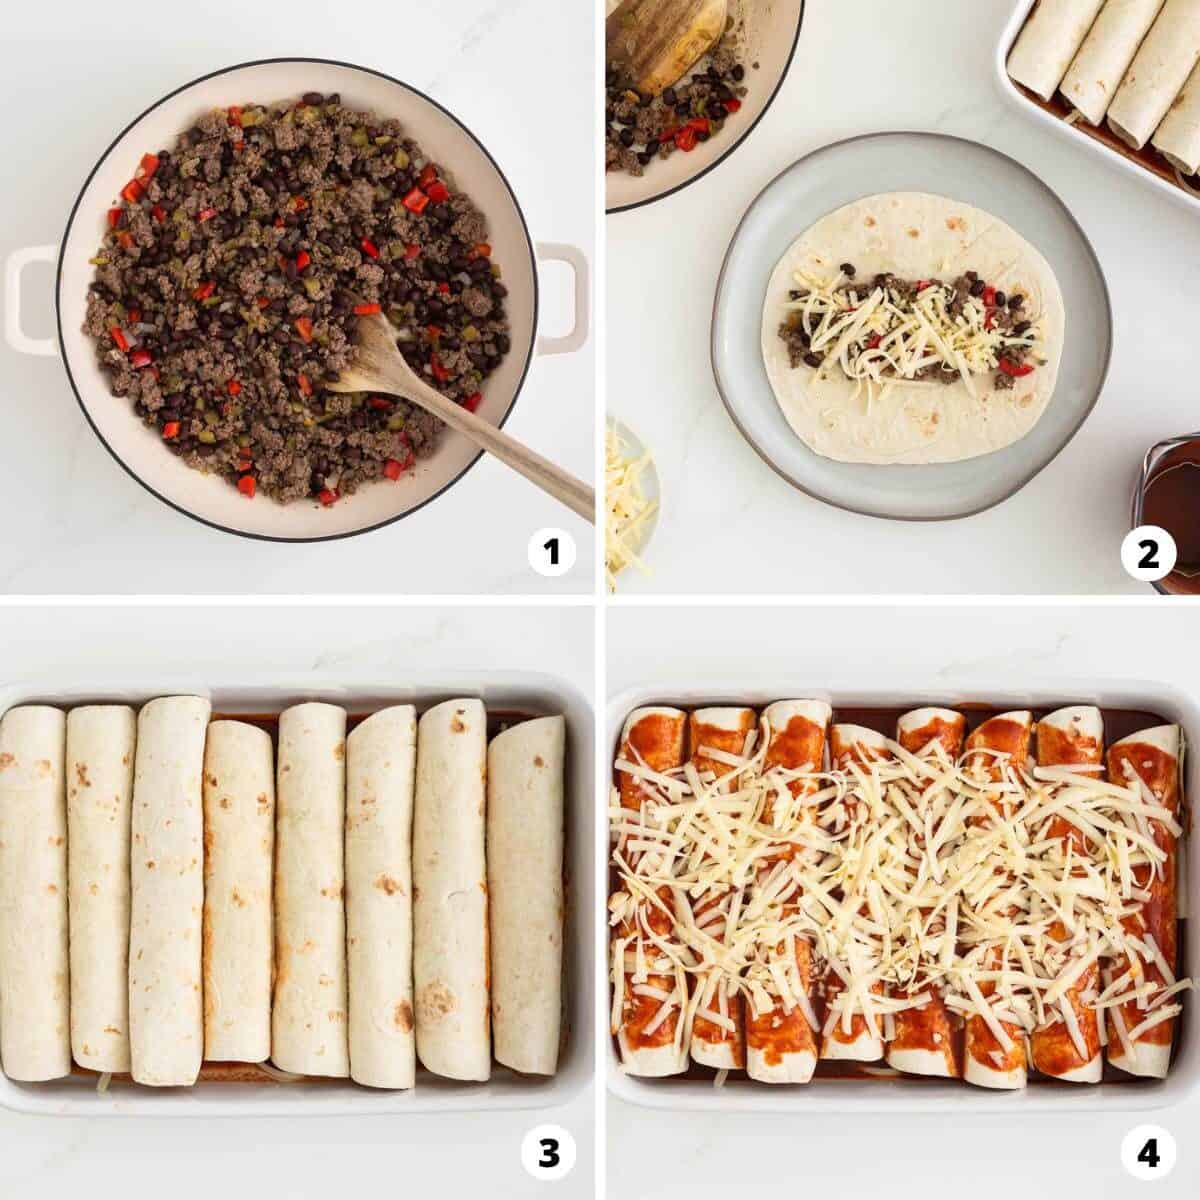 Showing how to make beef enchiladas in a 4 step collage.